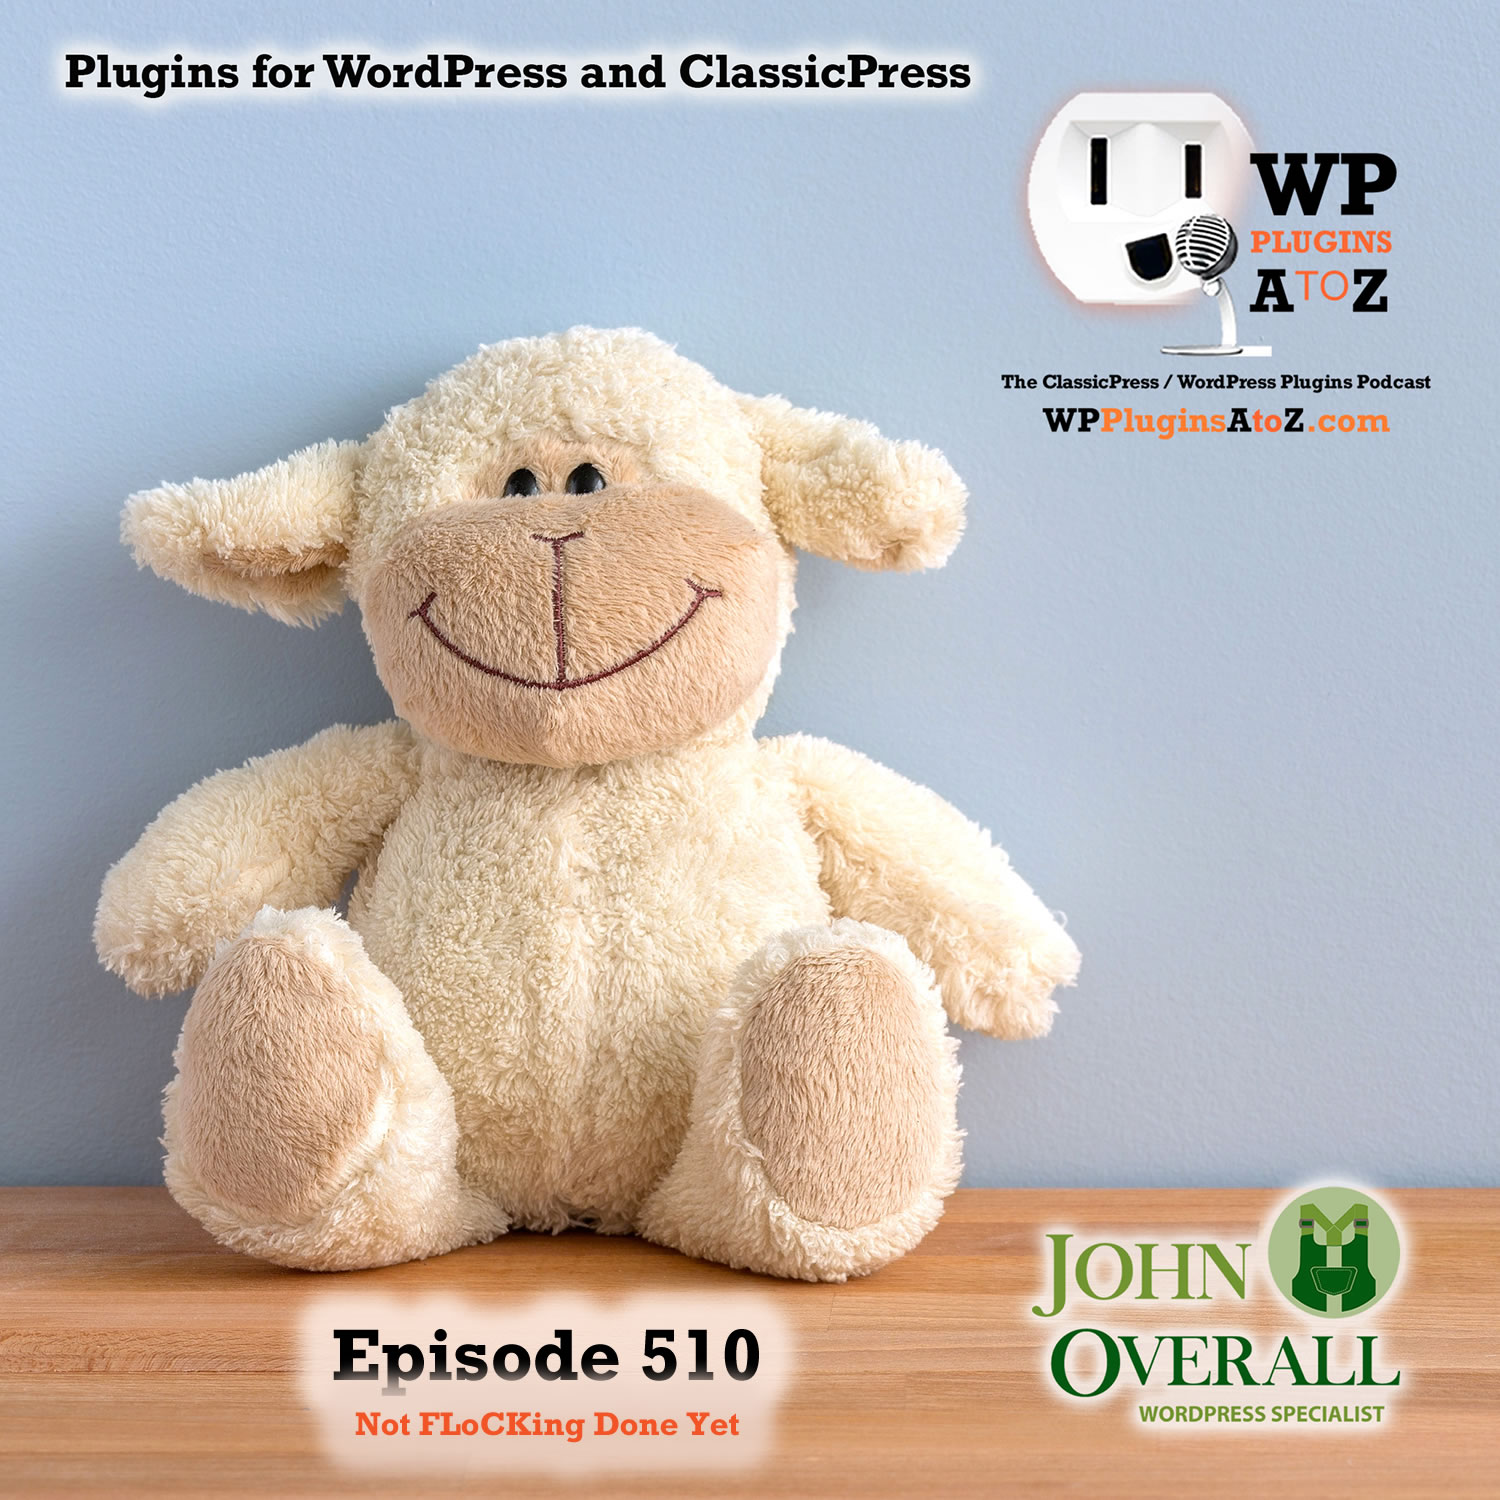 Not FLoCKing Done Yet It's Episode 510 - We have plugins for Stopping the Fullscreen, Starting Over, Custom Code, Limiting Admin Bar Access, Getting FLoCKing Excited, and ClassicPress Options. It's all coming up on WordPress Plugins A-Z! WP Reset – Most Advanced WordPress Reset Tool, Disable WordPress Block Editor Fullscreen Mode, Flic FLoC, Disable FLoC, Hide Admin Bar For User Roles, Code Generate and ClassicPress options on Episode 510.